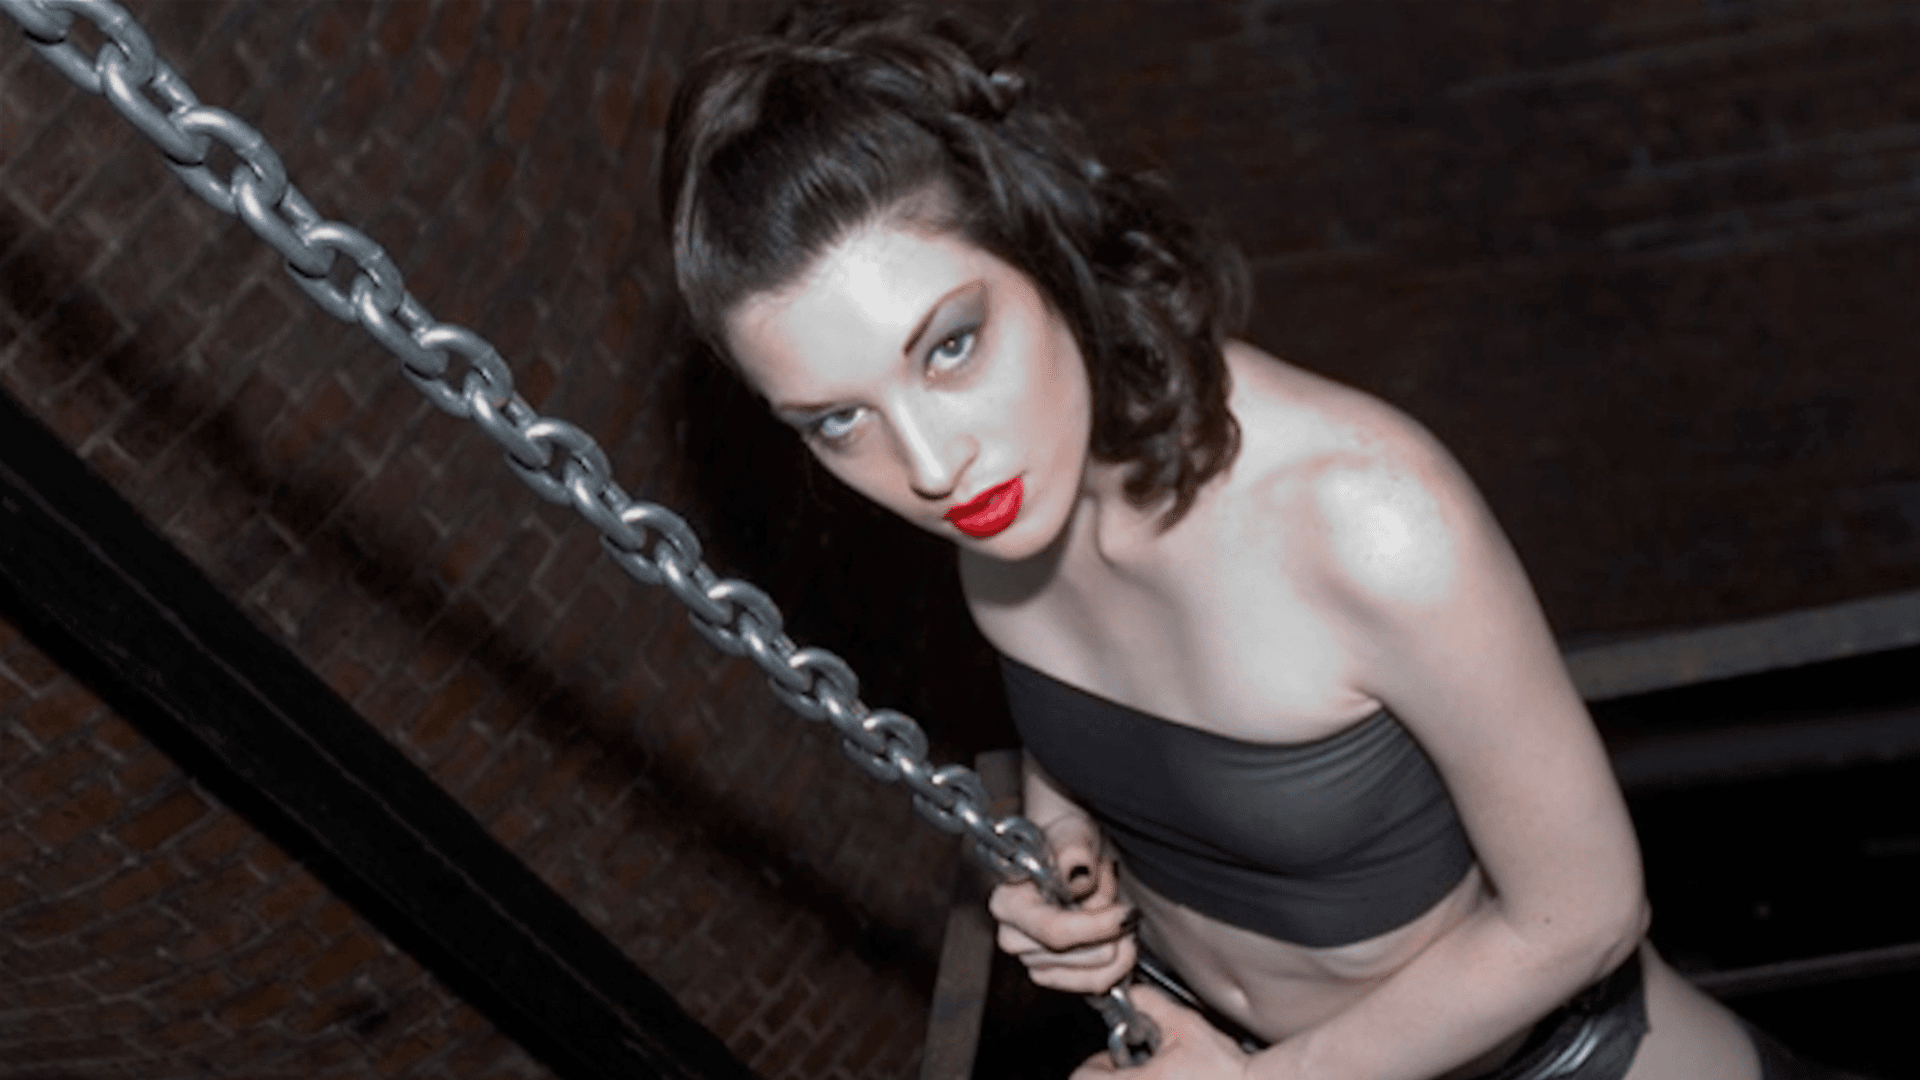 Stoya Girl Xxx Videos Com - Stoya on Her Pornstar Legacy and the Future of the Industry - VICE Video:  Documentaries, Films, News Videos